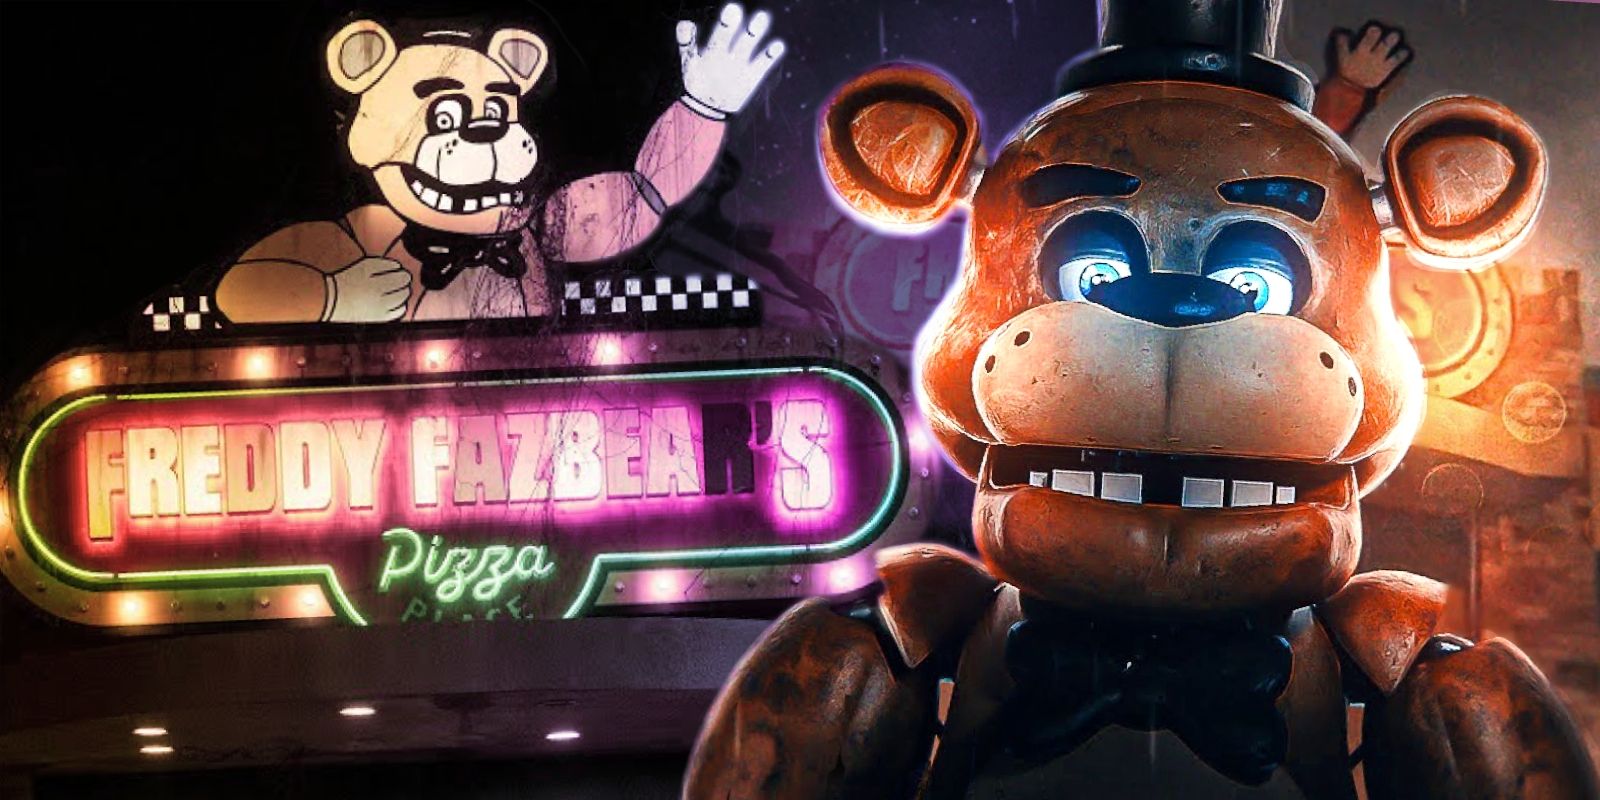 is the five nights at freddys movie canon